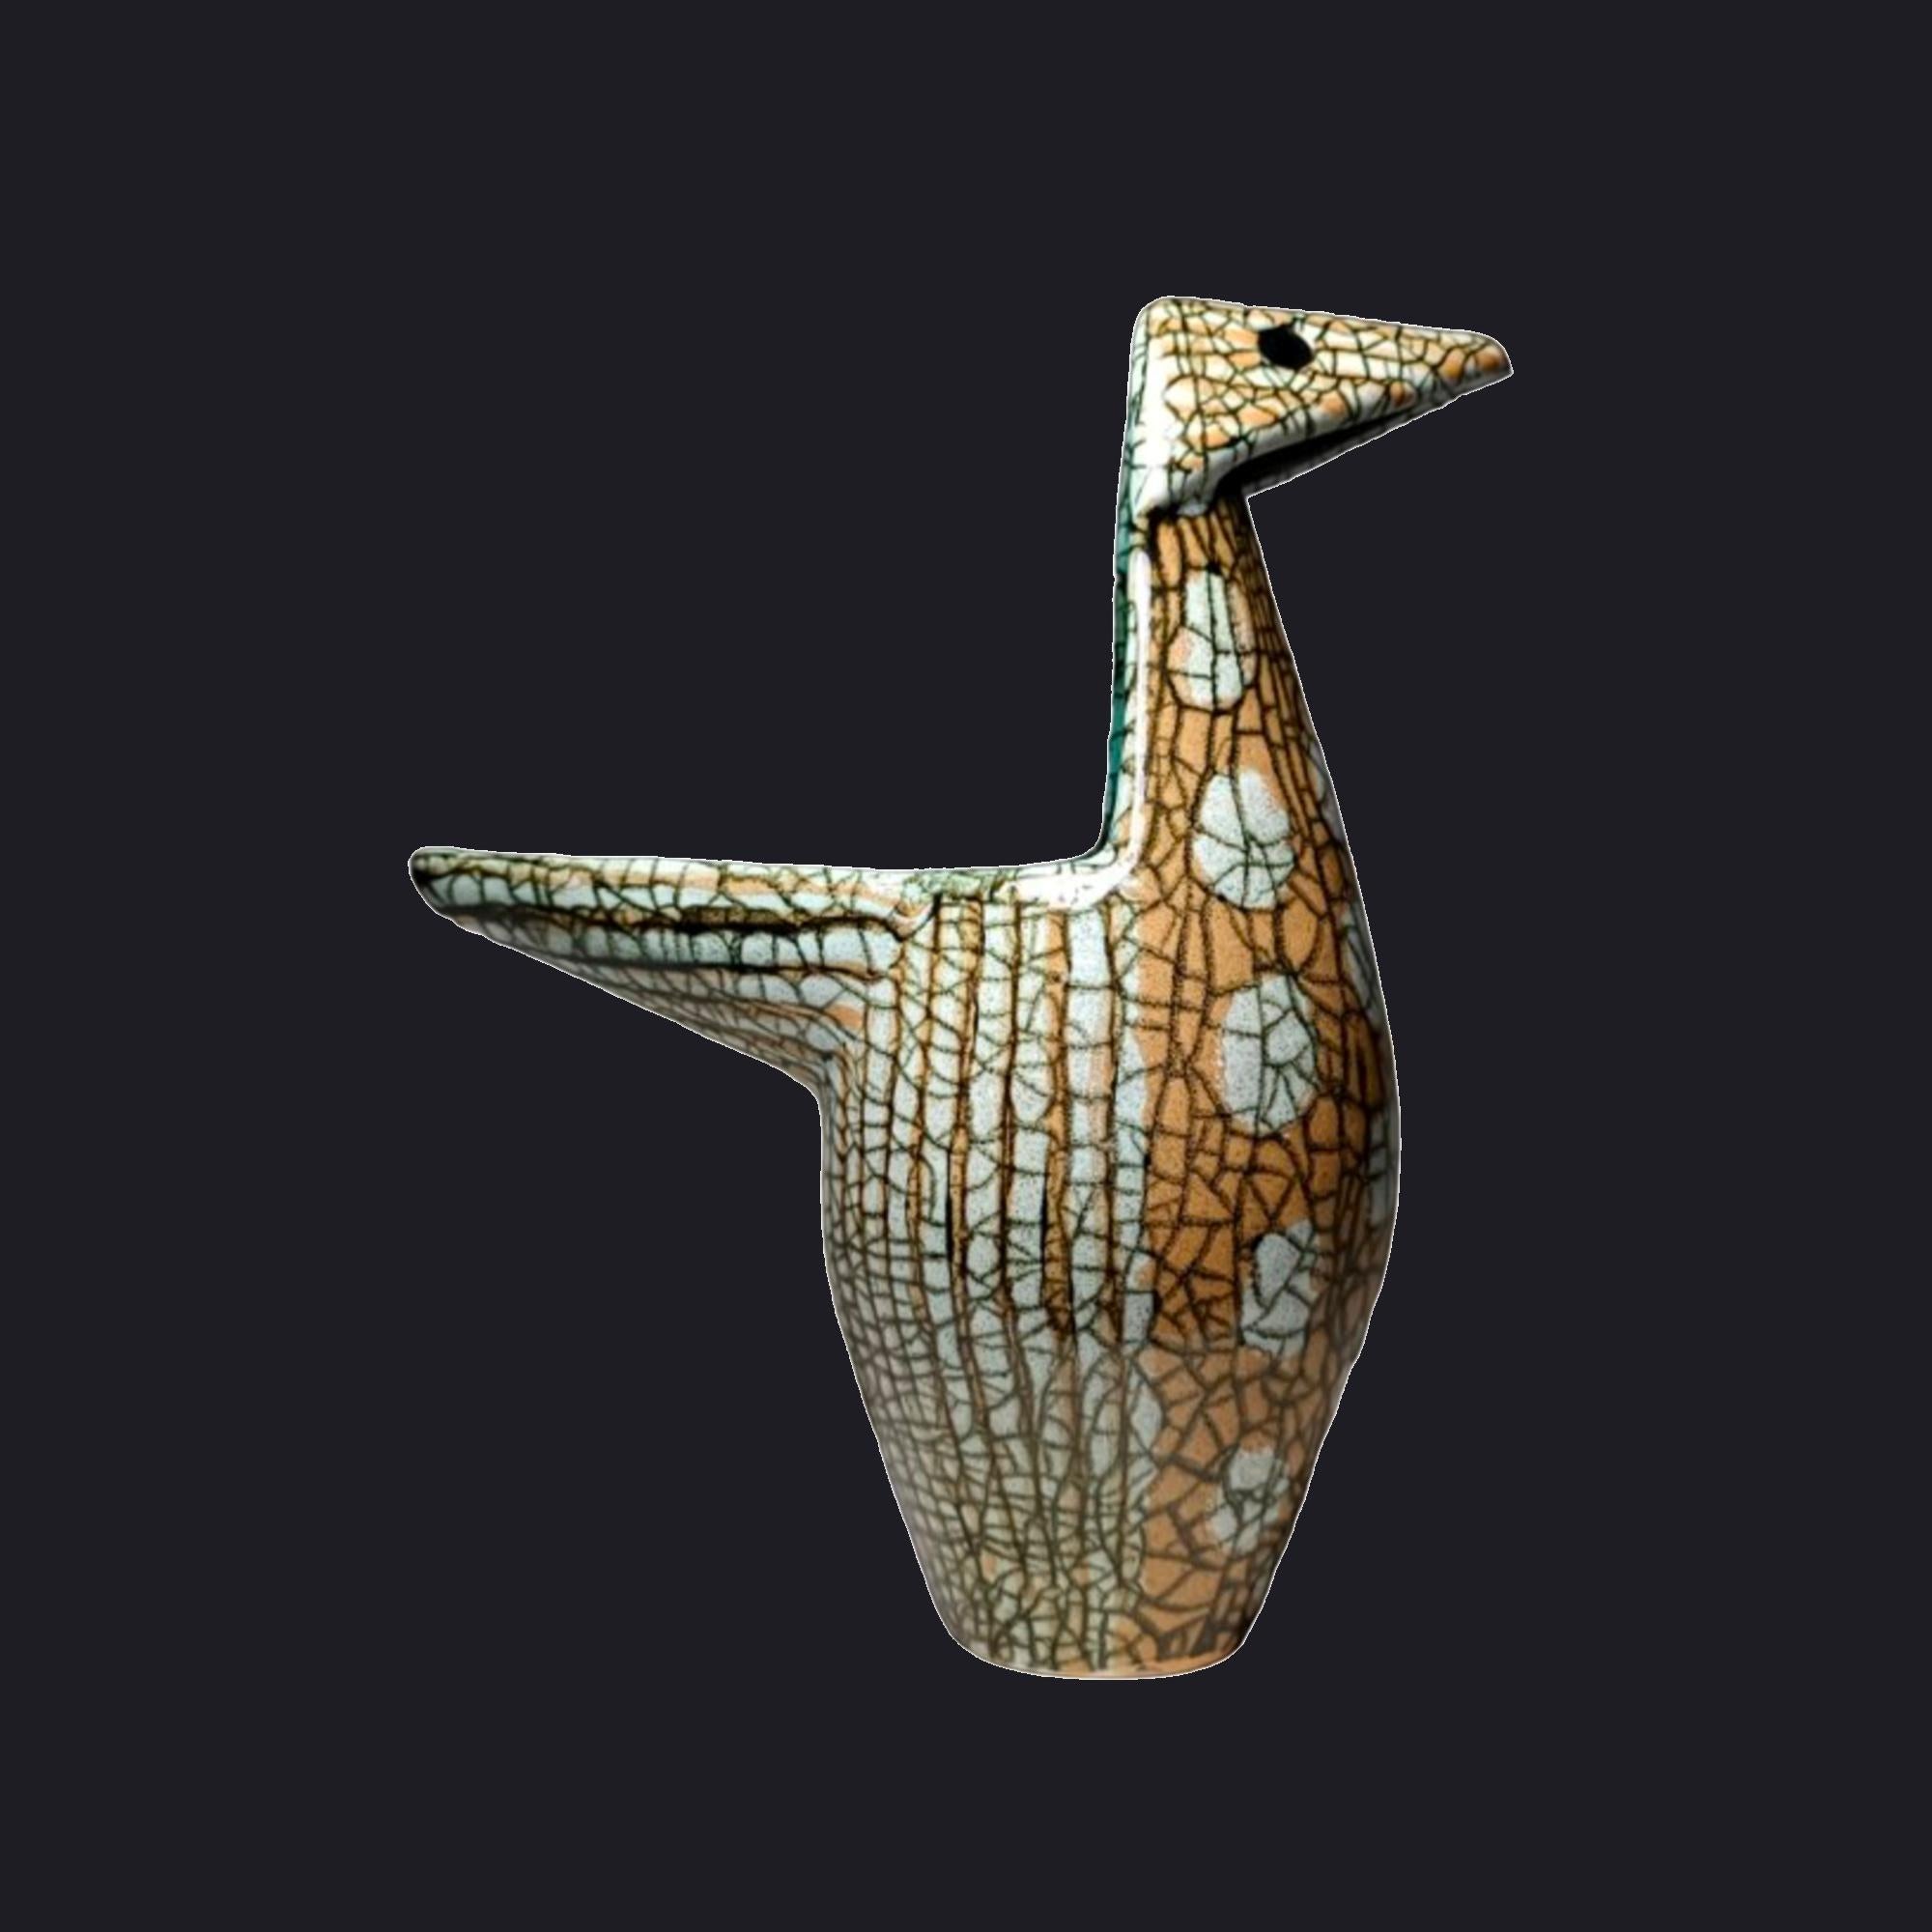 Mid-20th Century Vintage Bird Vase by Gorka Géza by Applied Arts Company 1959 Hungary For Sale